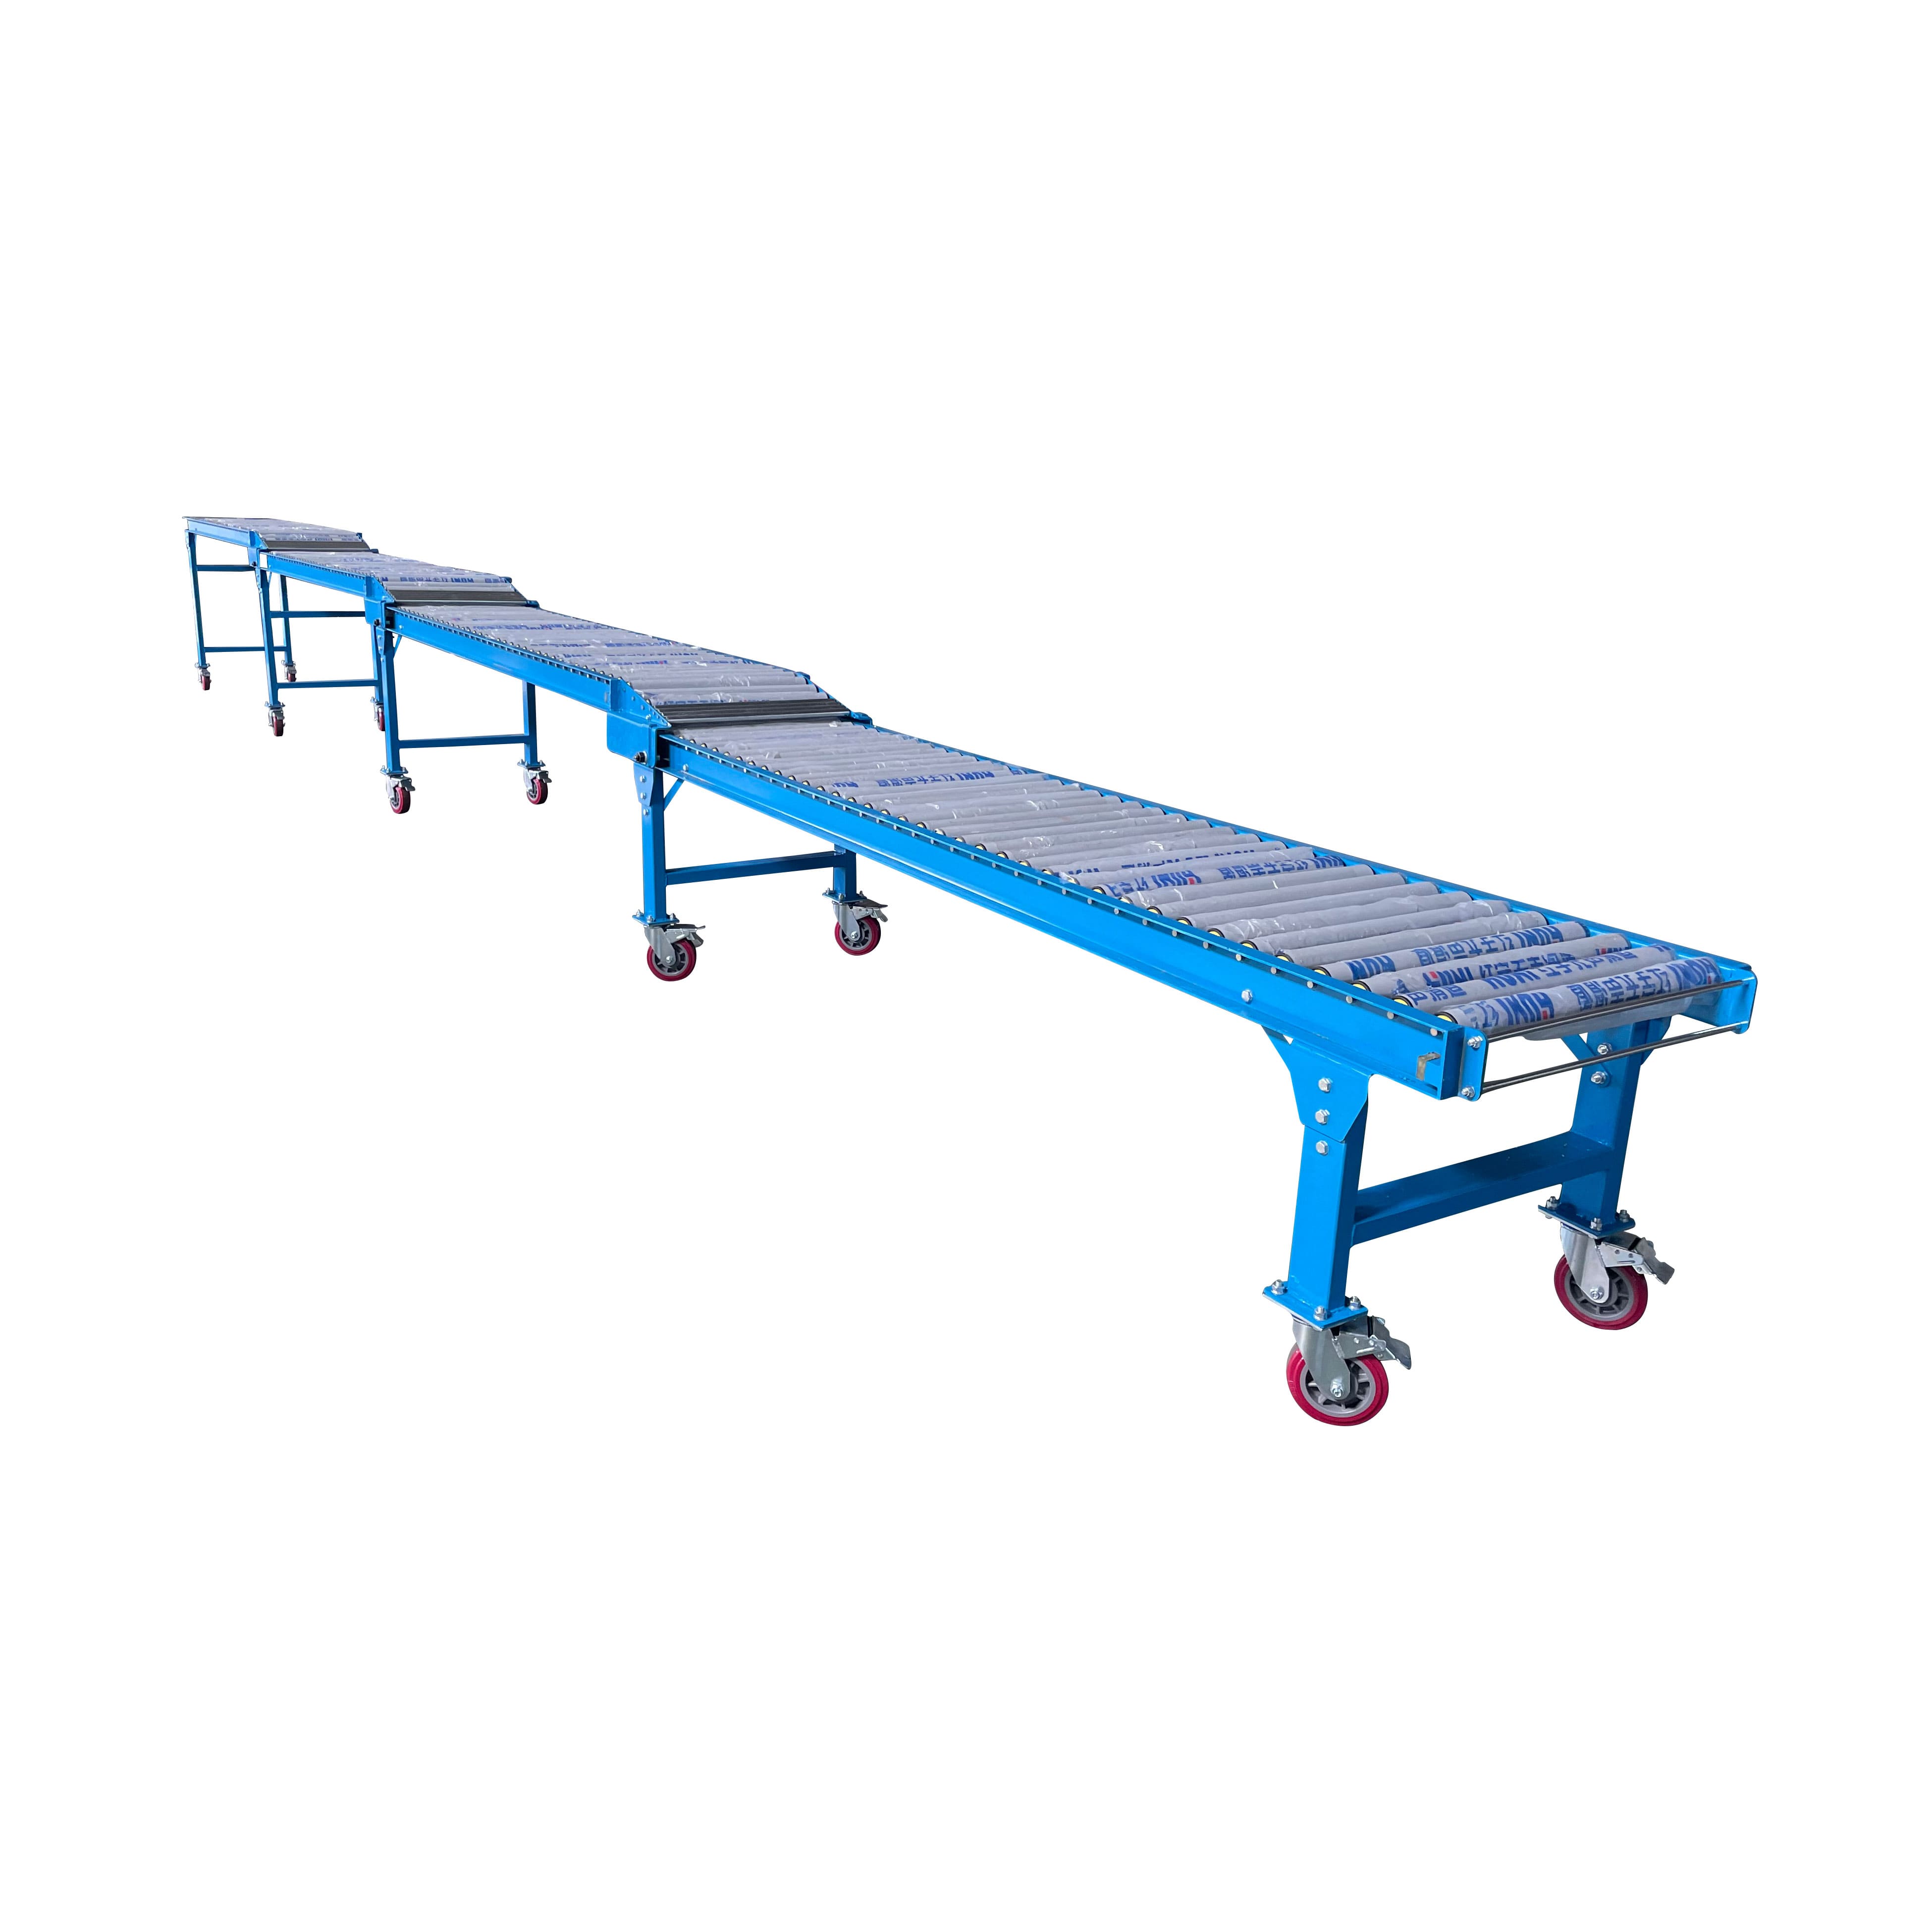 Roll-to-Roll-Driven Roller Conveyors